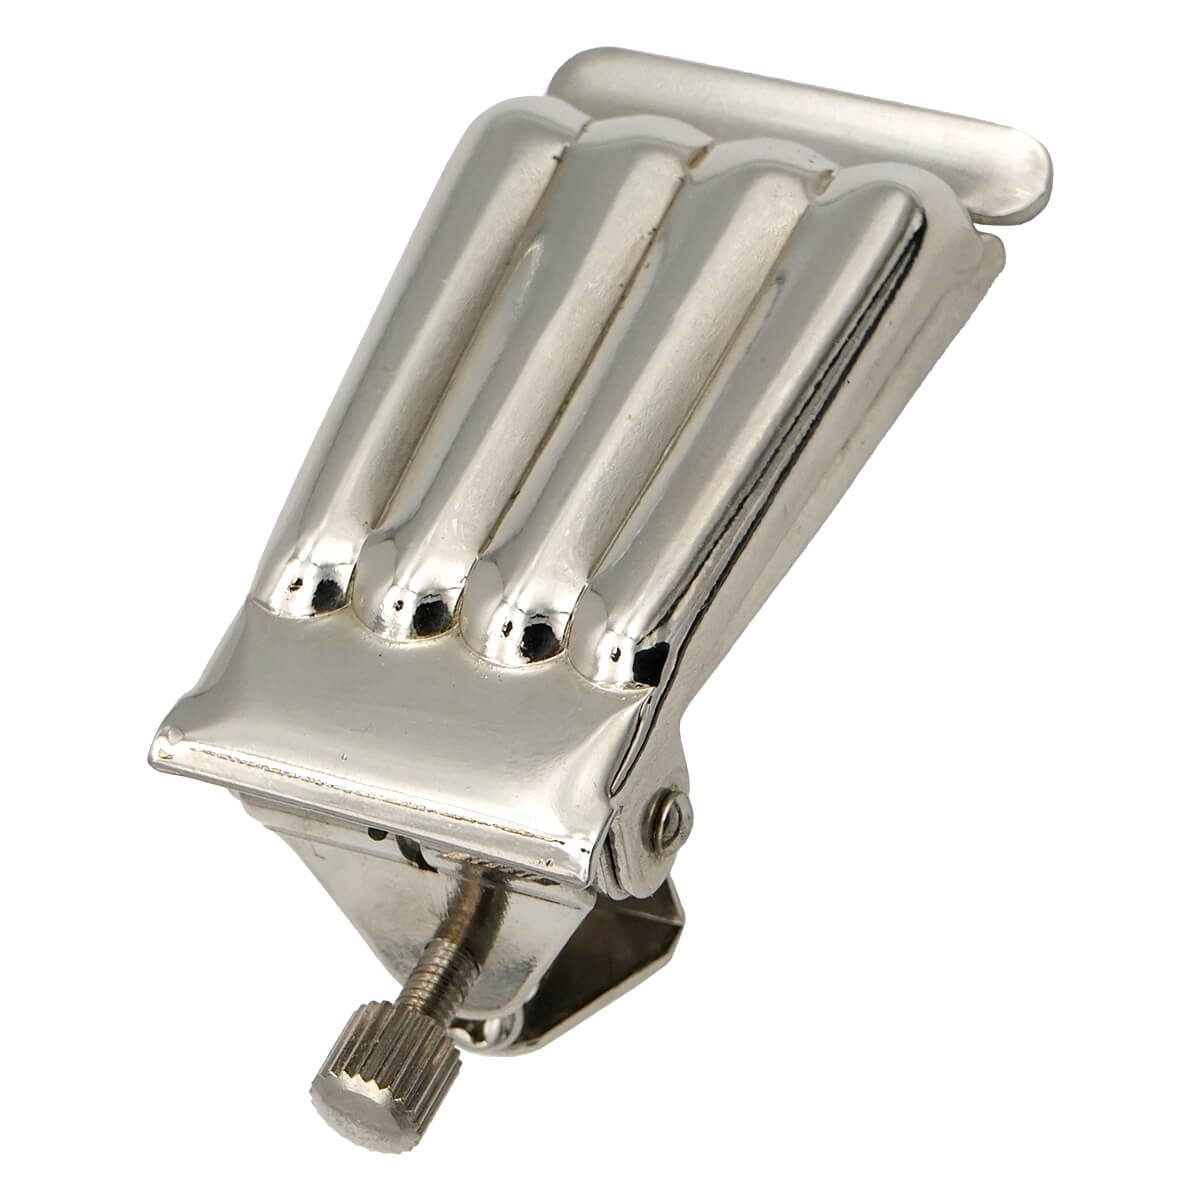 Clamshell Style NICKEL NEW Banjo Tailpiece 